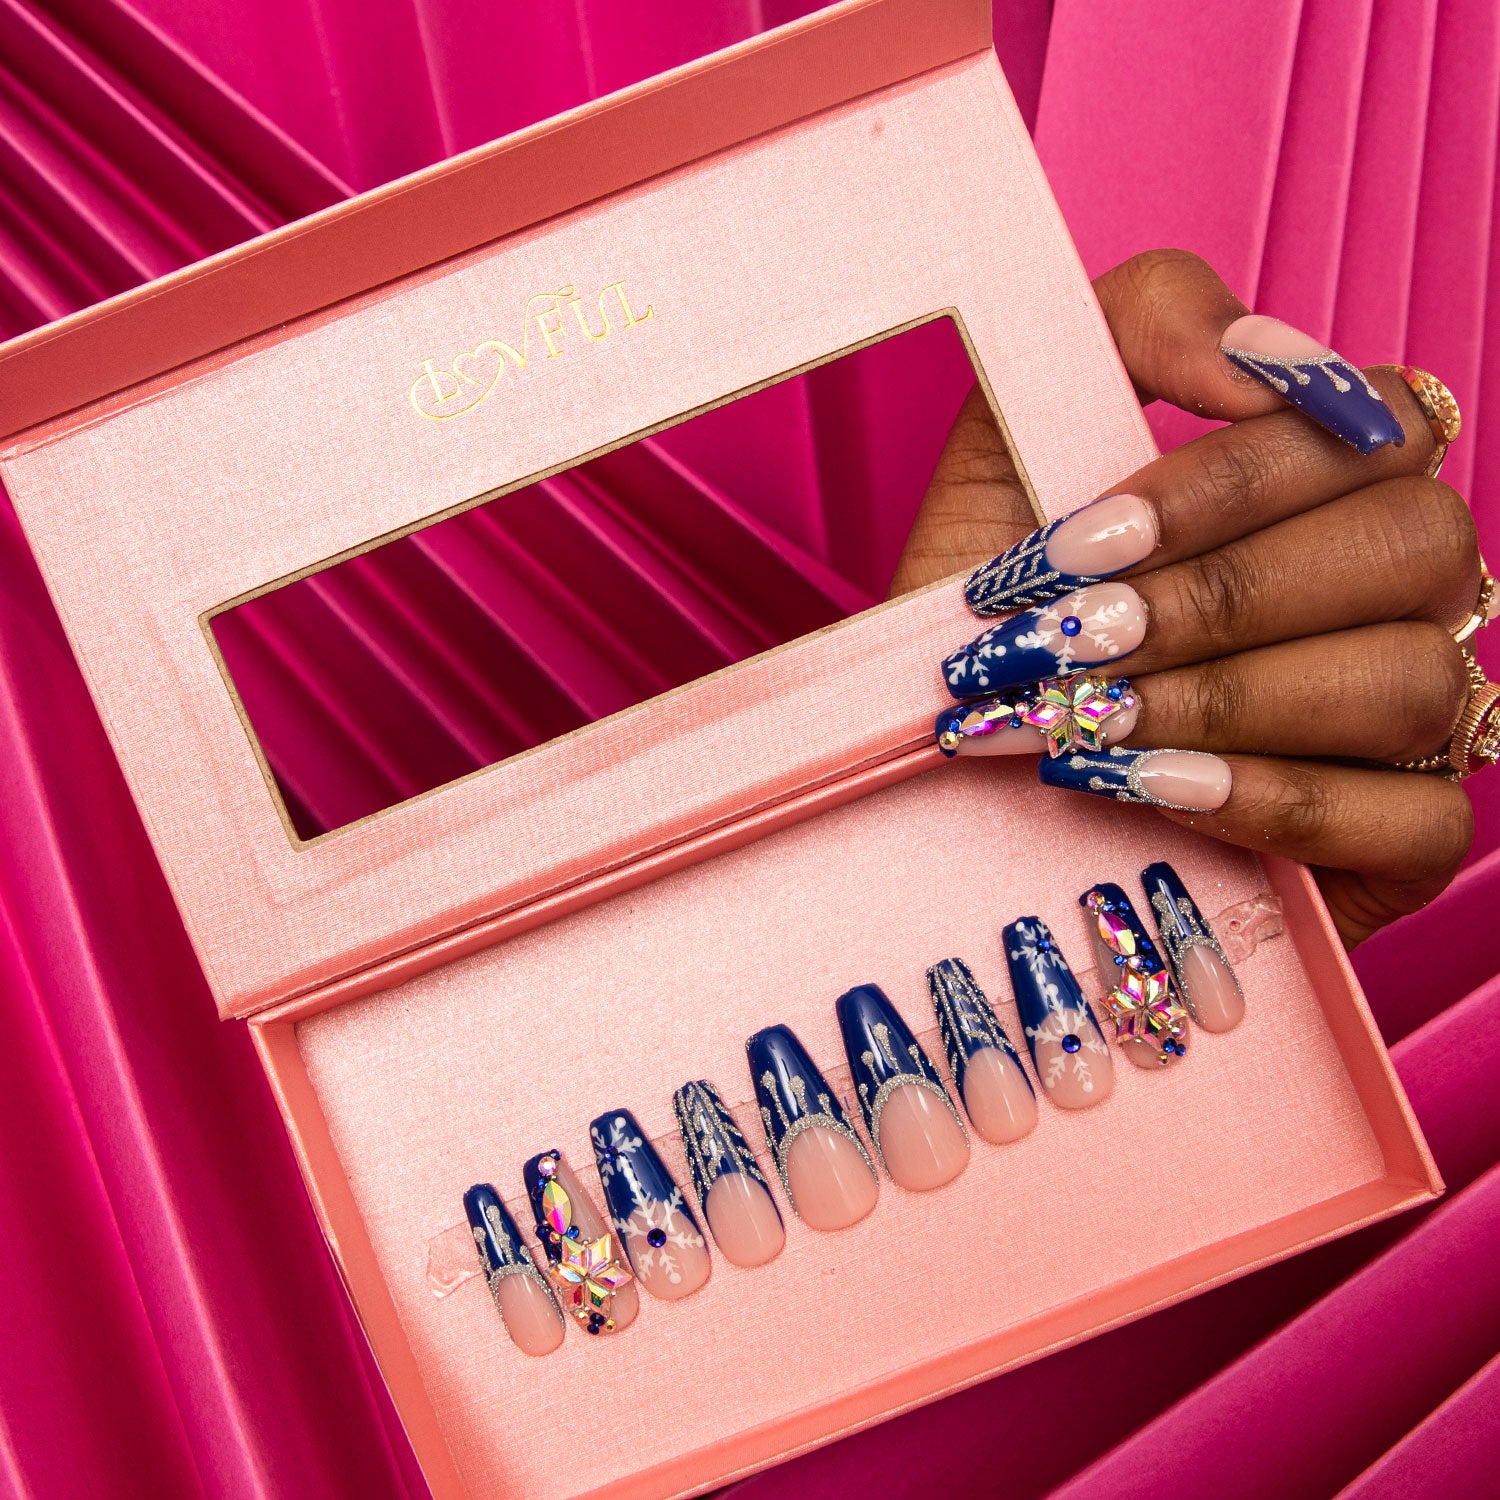 Snow Waltz Press-On Nails with blue jewelry-colored French tips and white snowflakes displayed in an elegant pink box. Hand showcasing the decorated nails alongside the box against a pink fabric background.